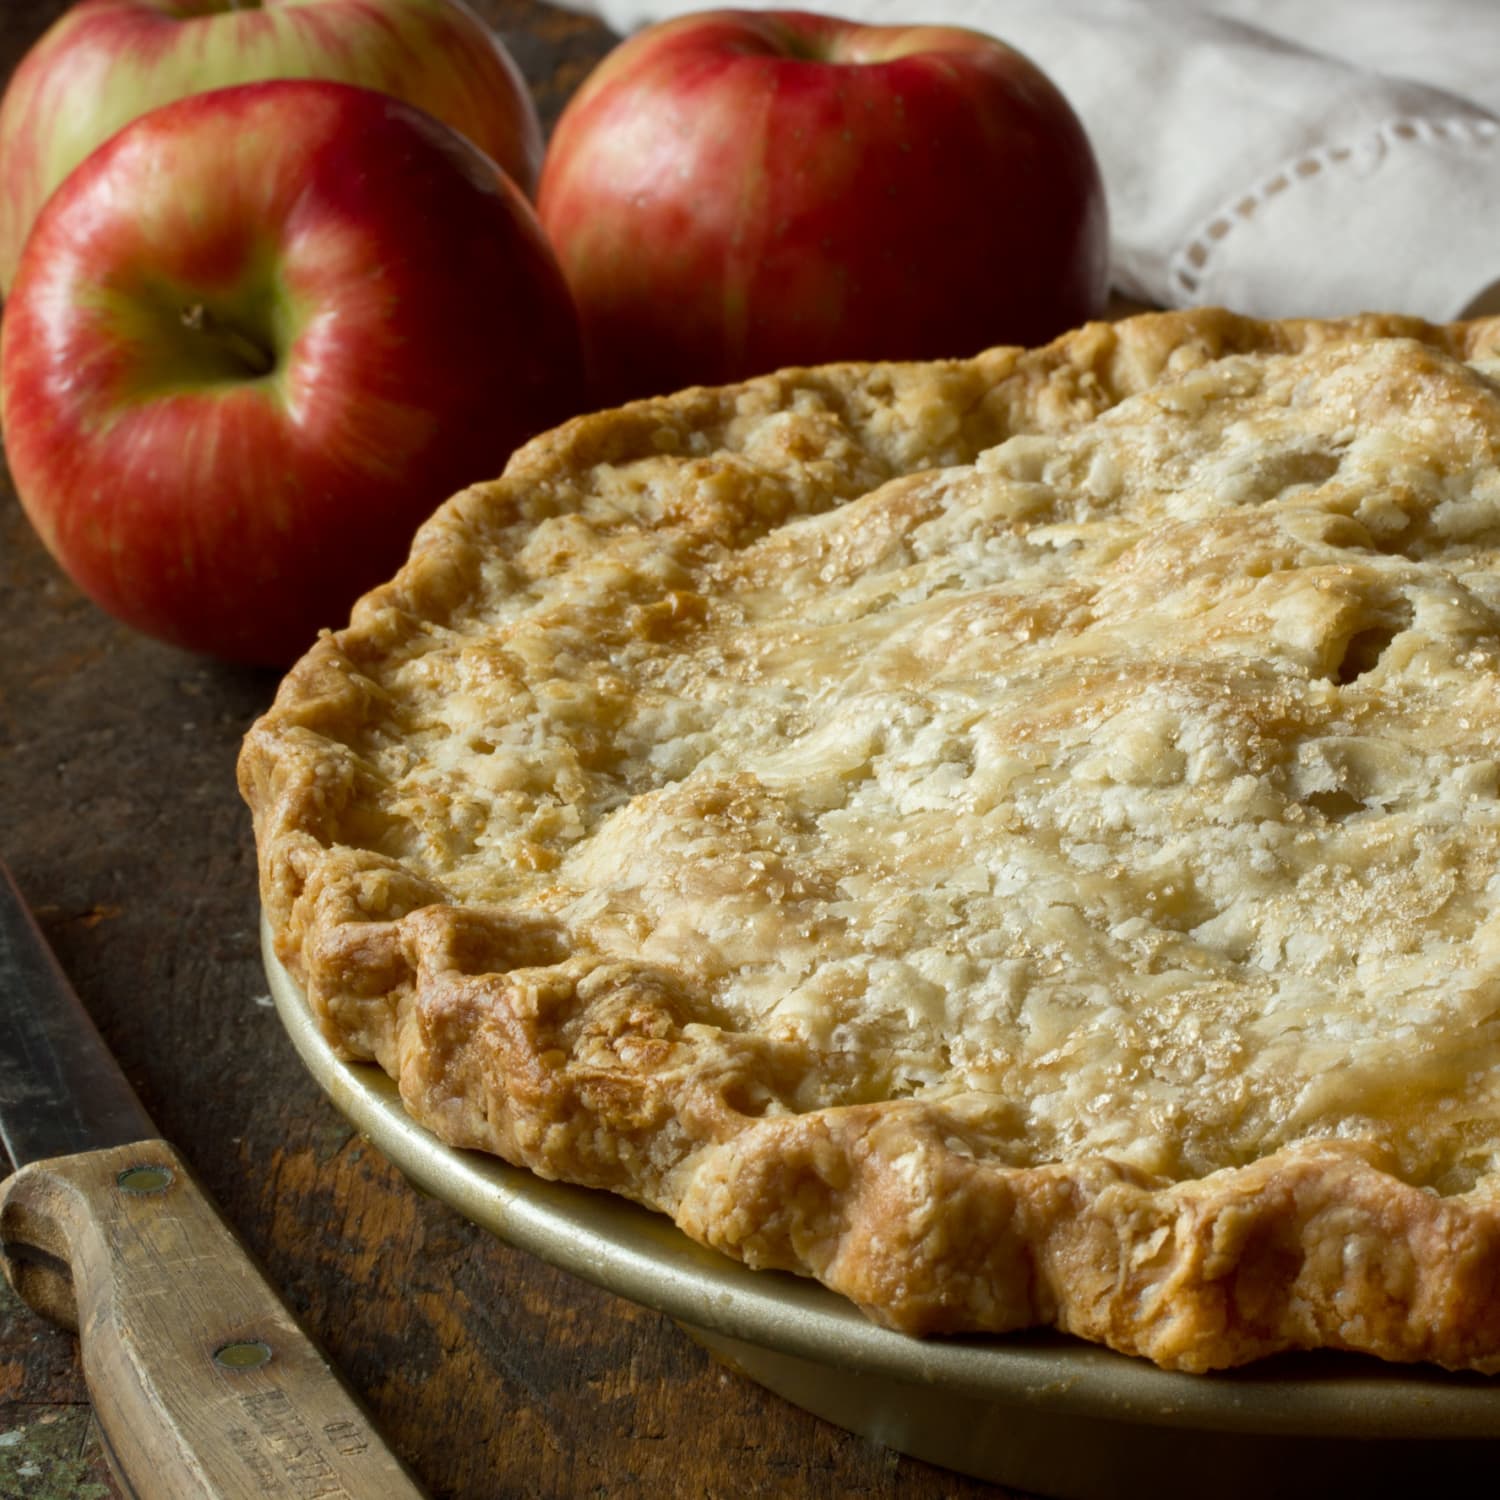 Two-fer-one: The Apple-Rine Pie